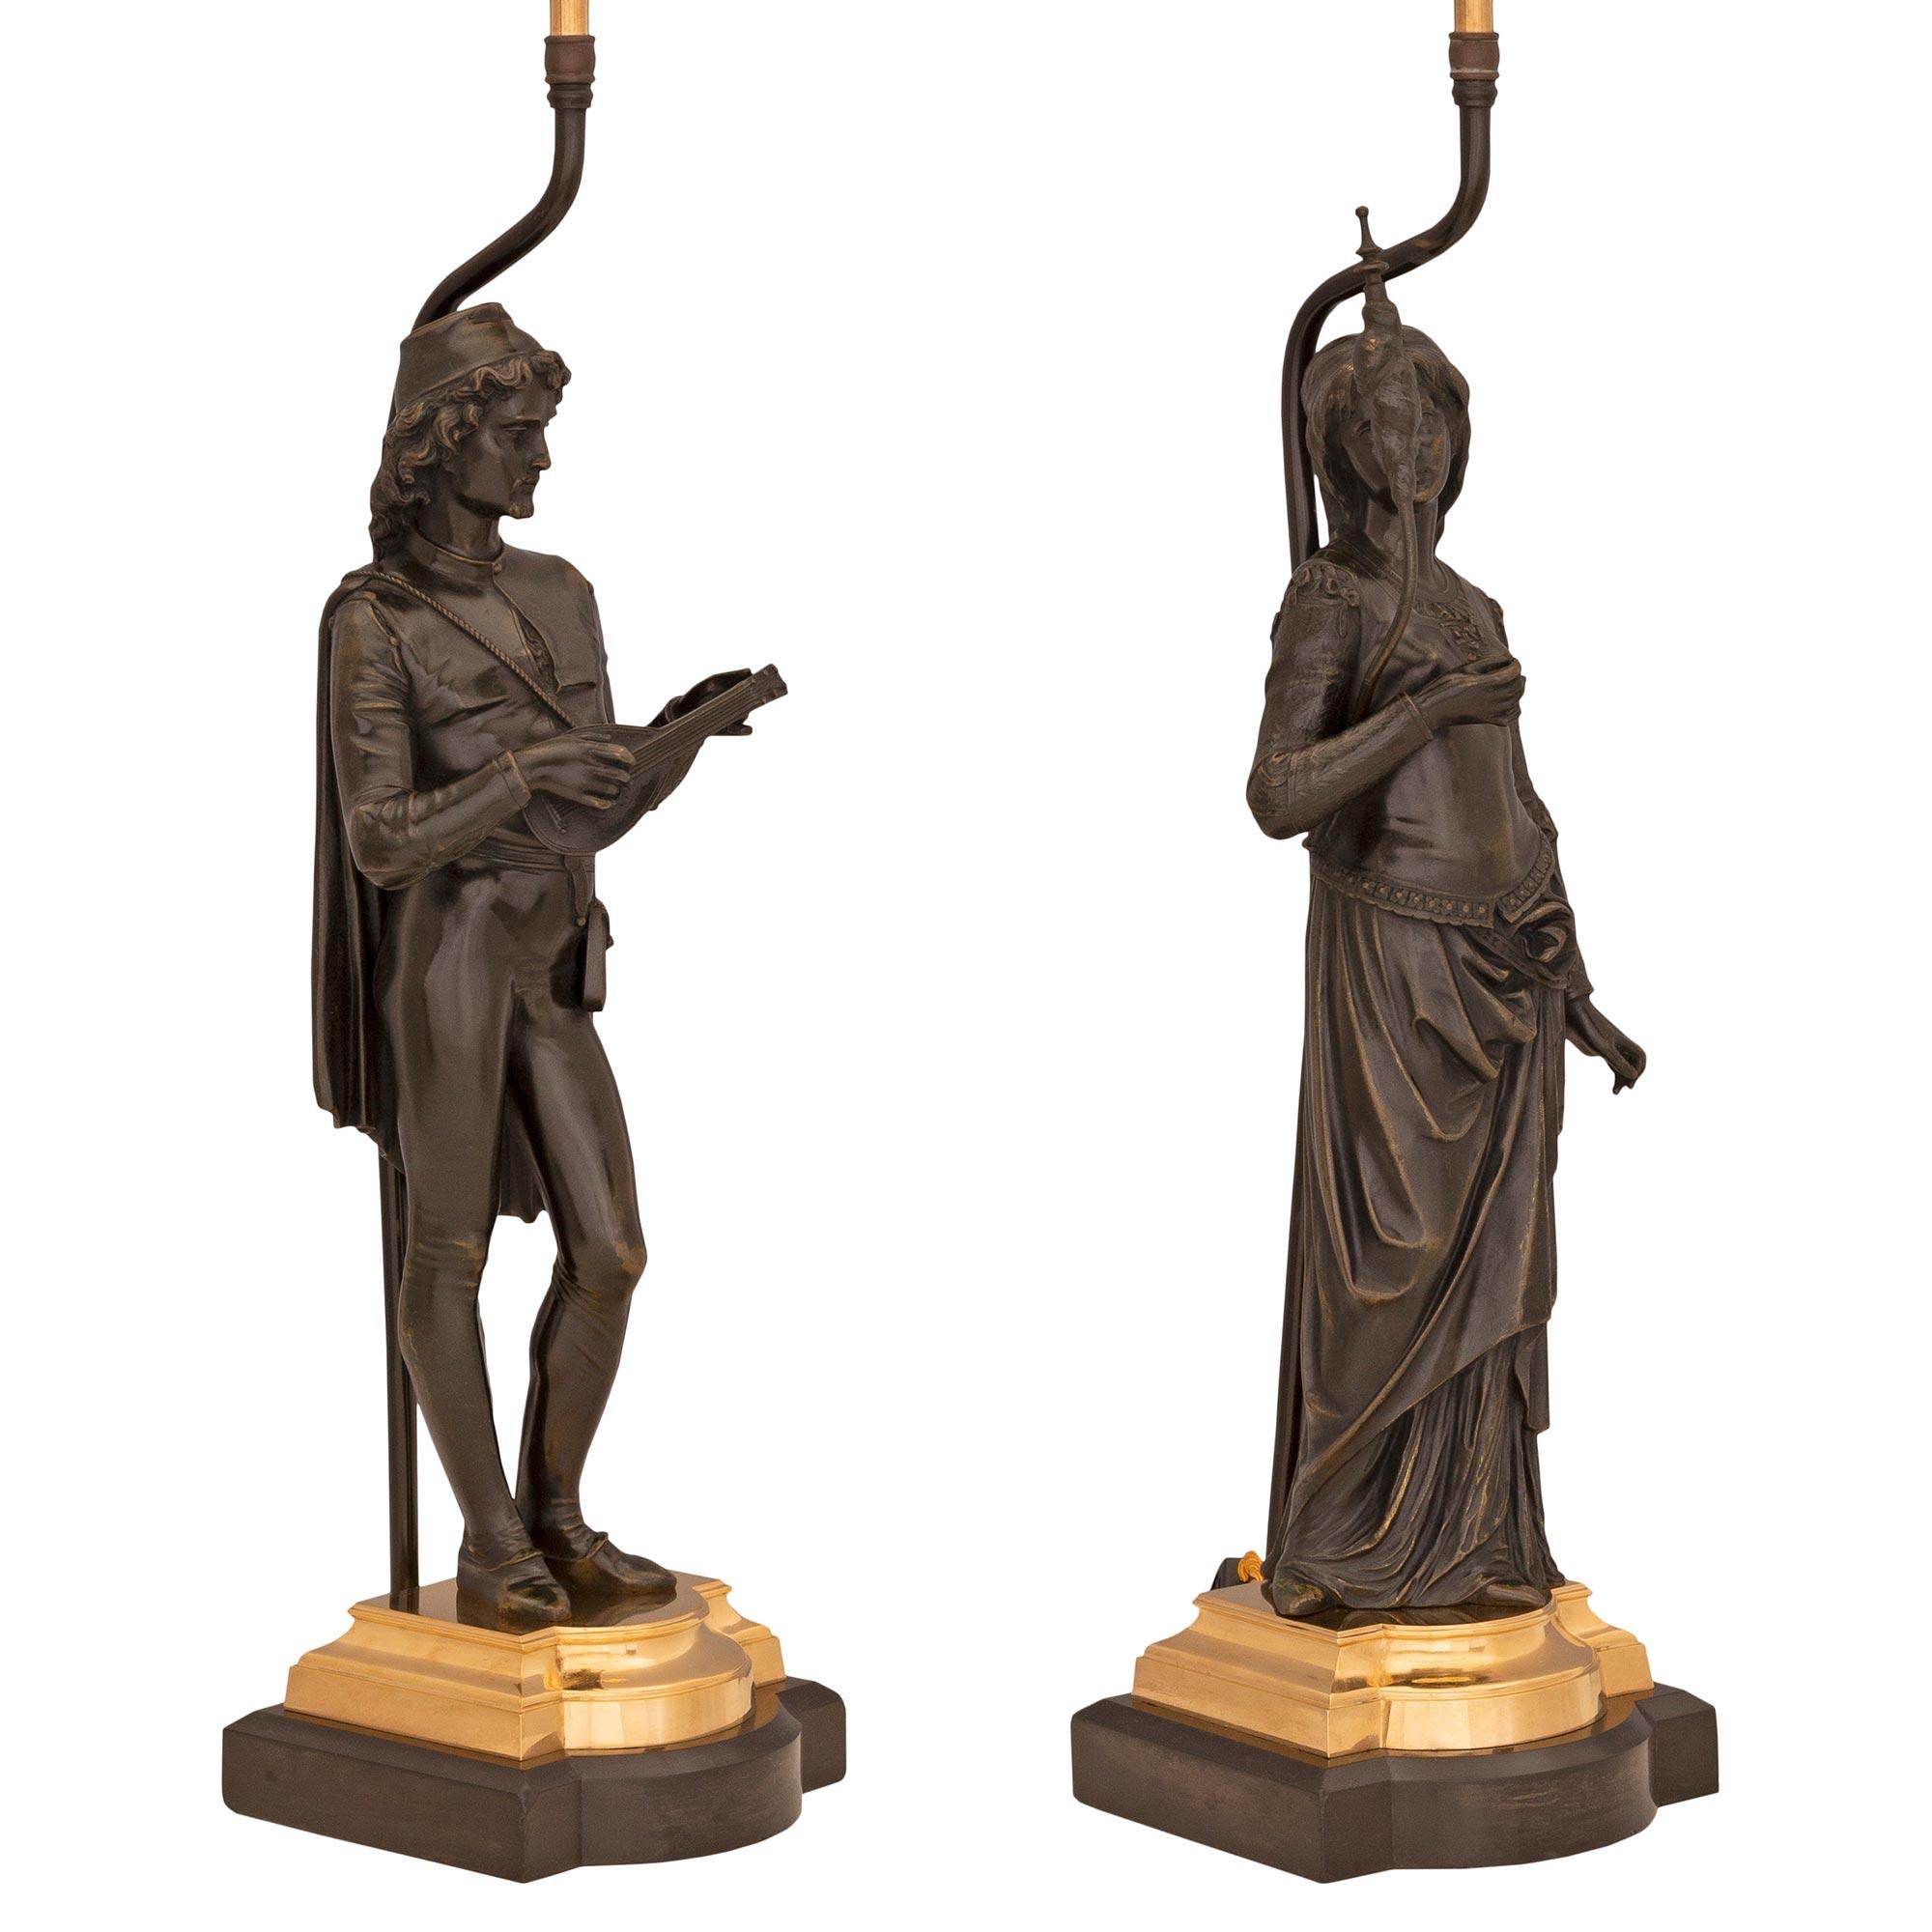 A beautiful and high quality true pair of French 19th century Neo-Classical st. patinated bronze and ormolu lamps. Each lamp is raised by fine patinated bronze and ormolu bases with convex fronts and elegant stepped mottled designs. To the left is a